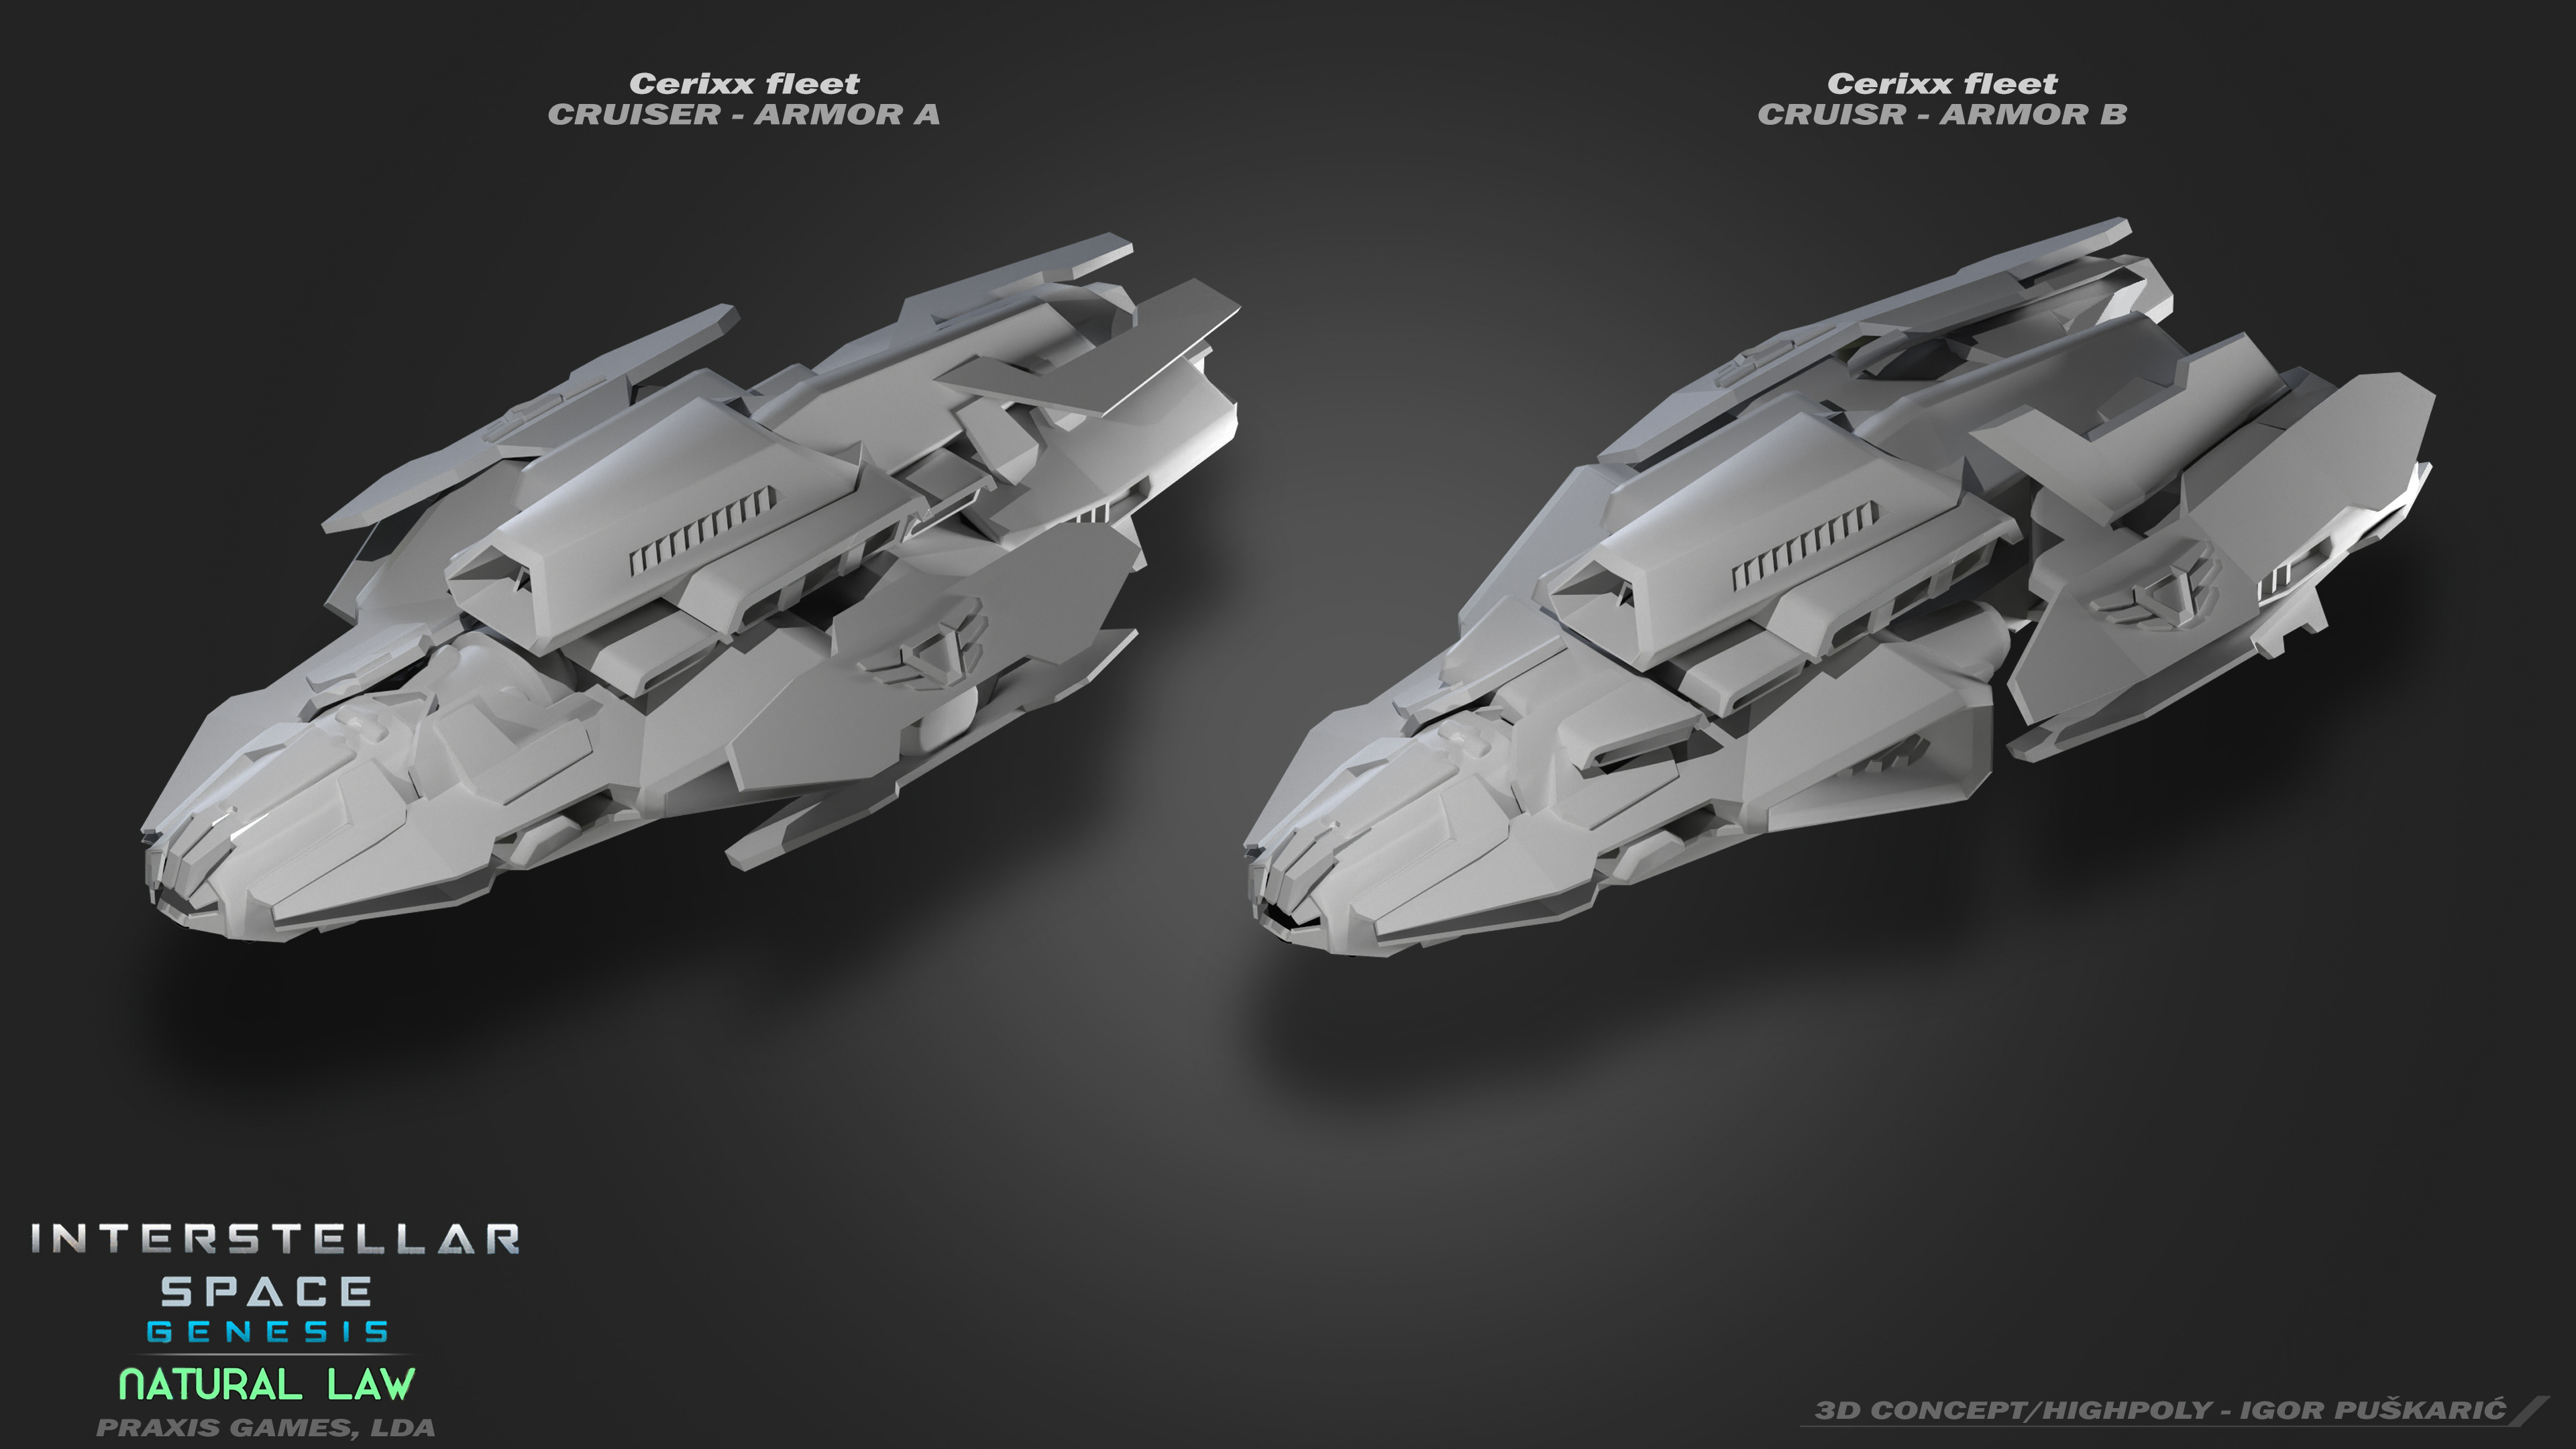 Cerixx Cruiser A and B versions